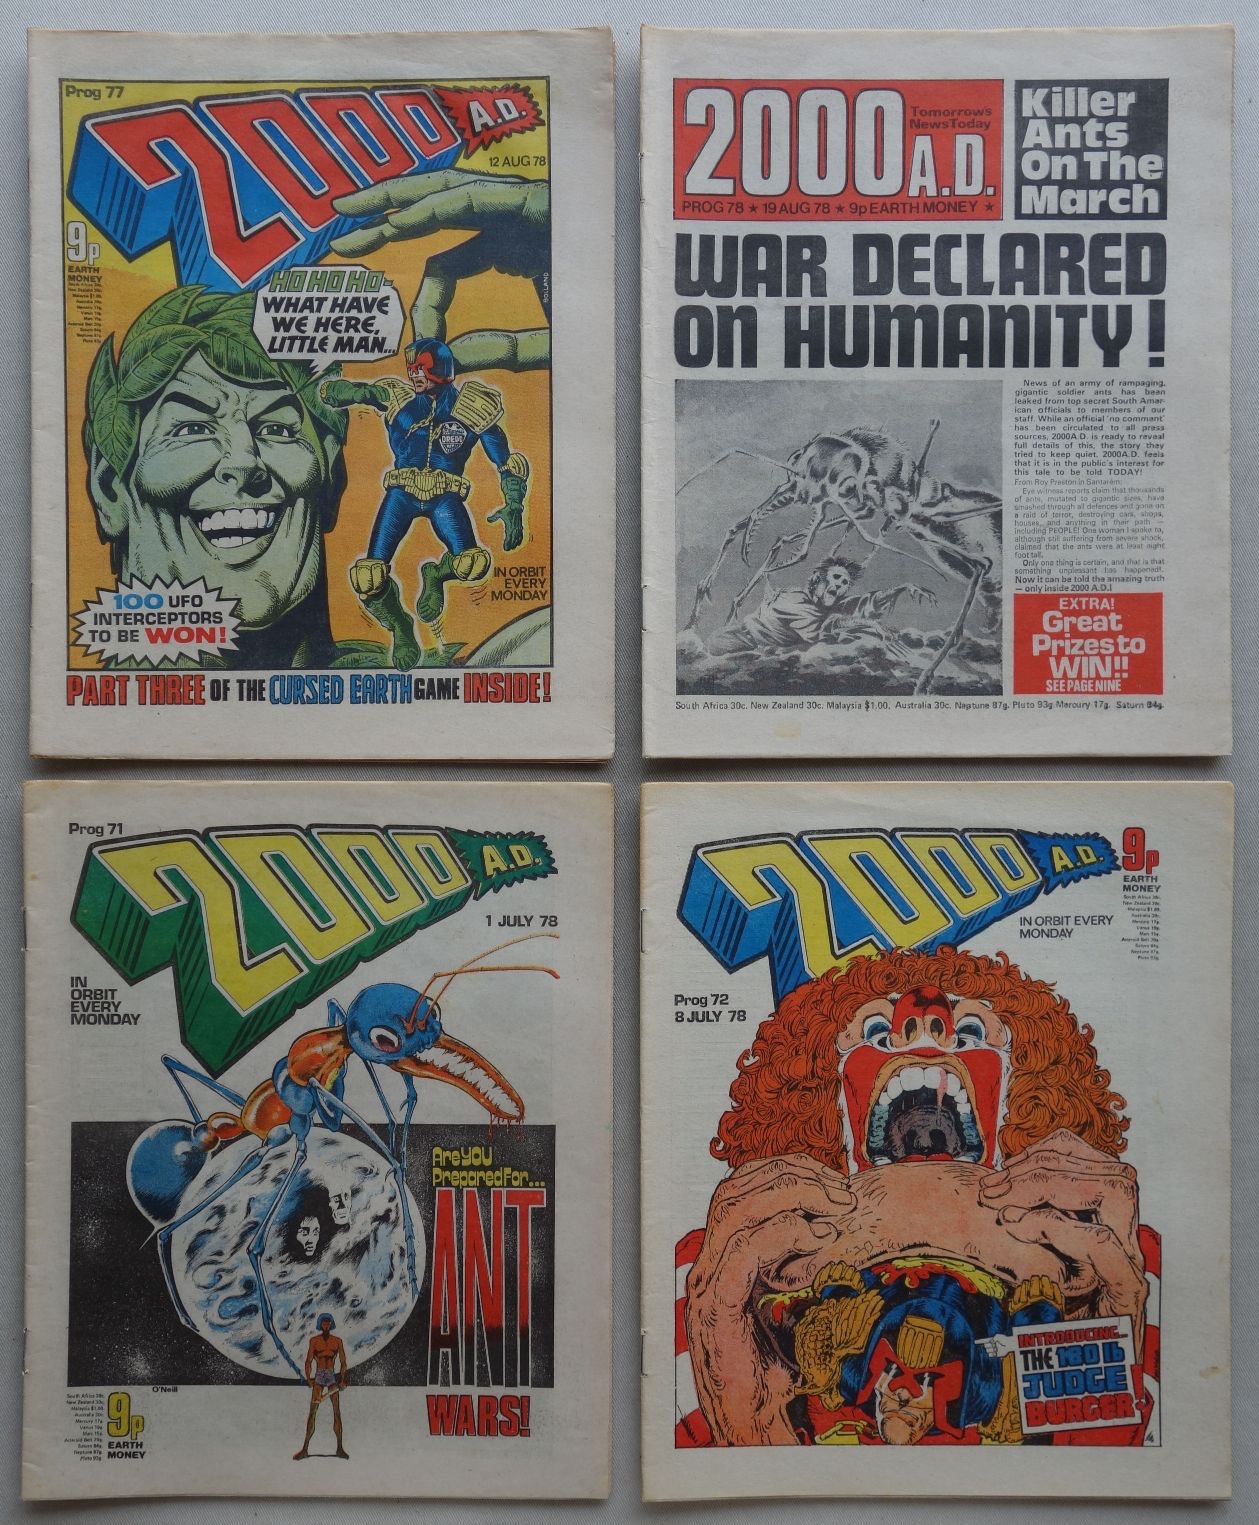 2000AD Progs 71, 72, 77, 78 - the "Banned" issues, a title describing the Judge Dredd strip inside which faced copyright issues from leading fast food companies at the time of first publication